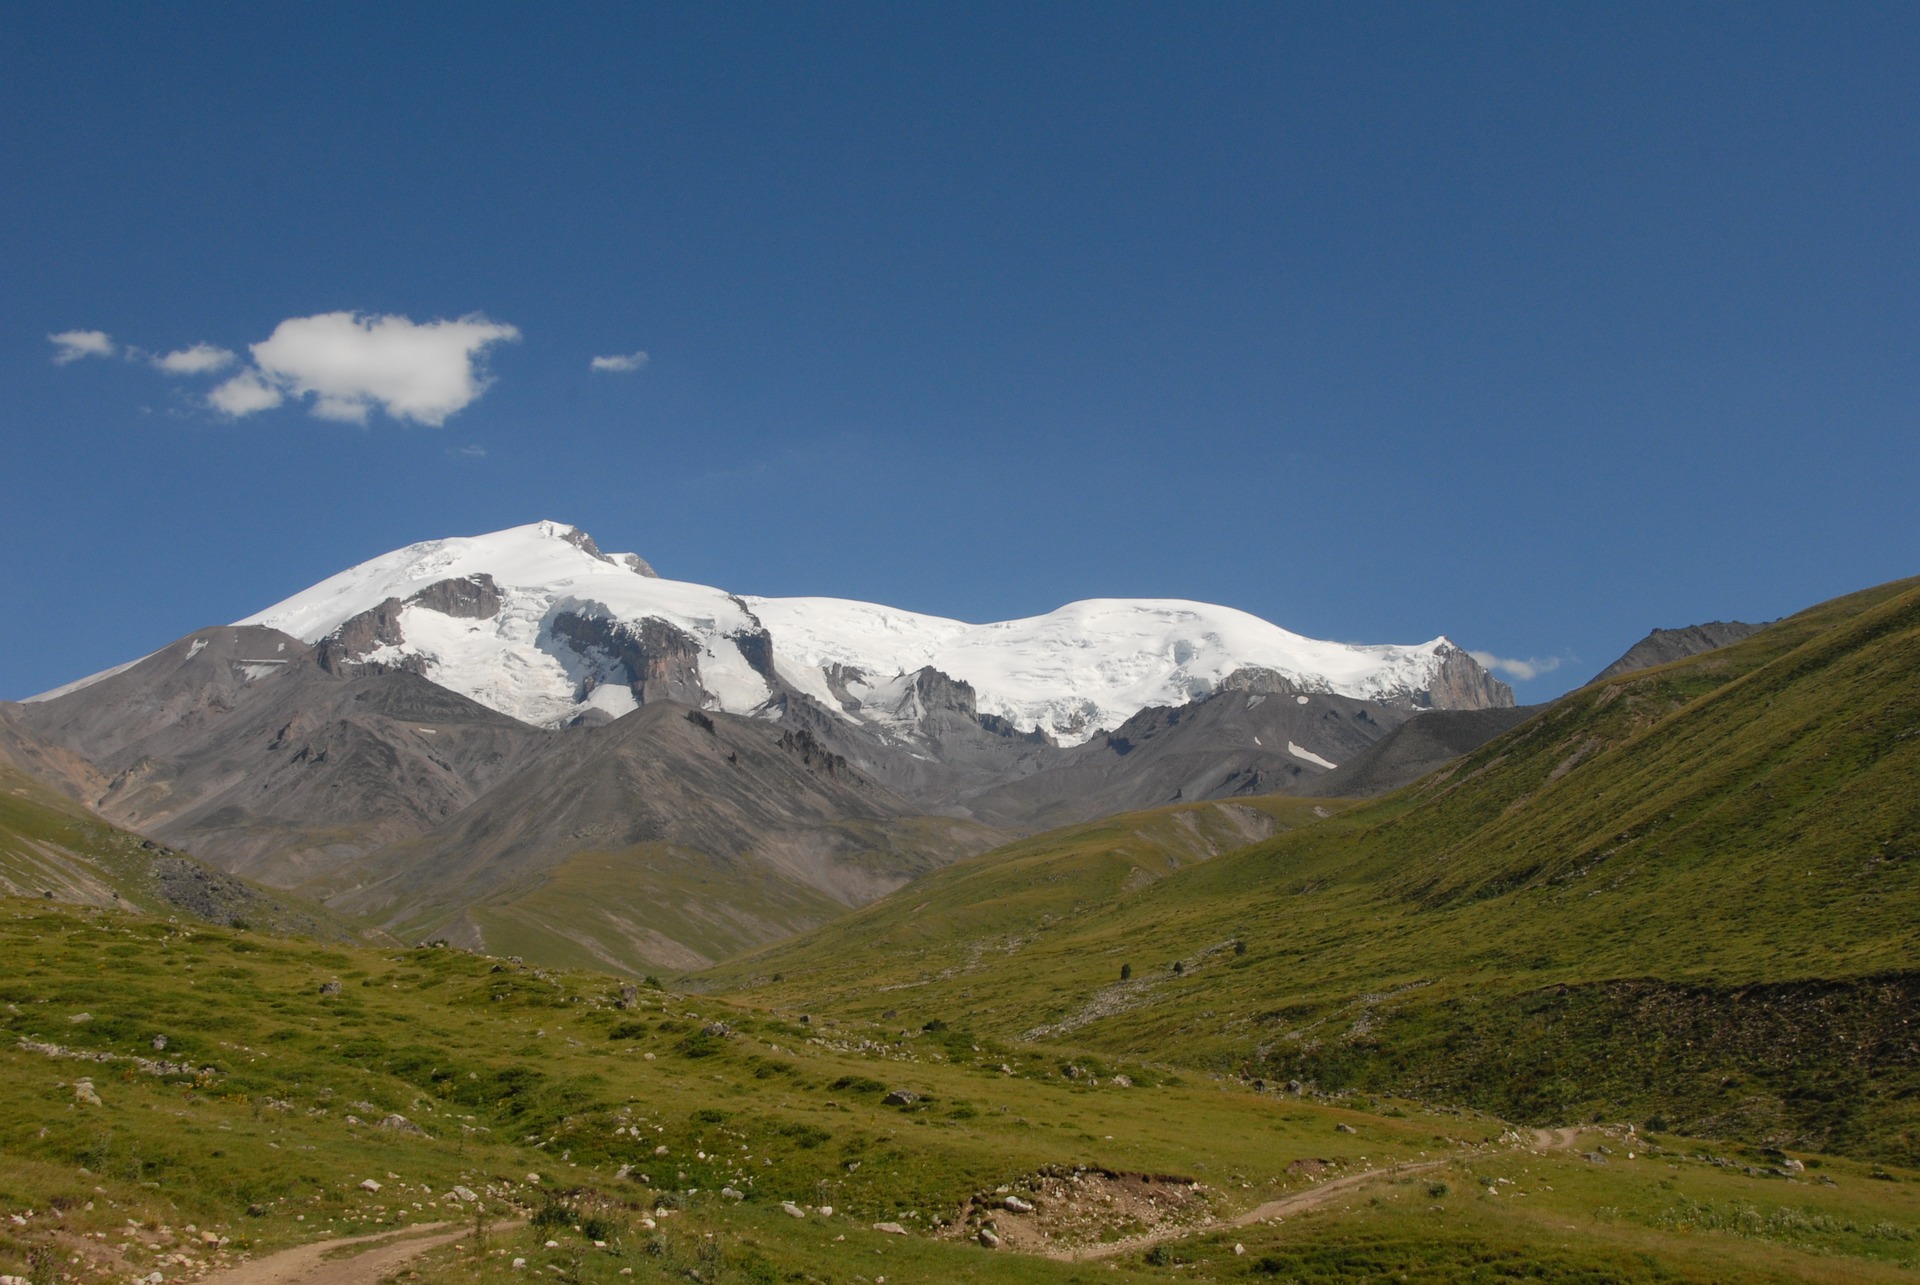 7 fact you didn’t know about Elbrus